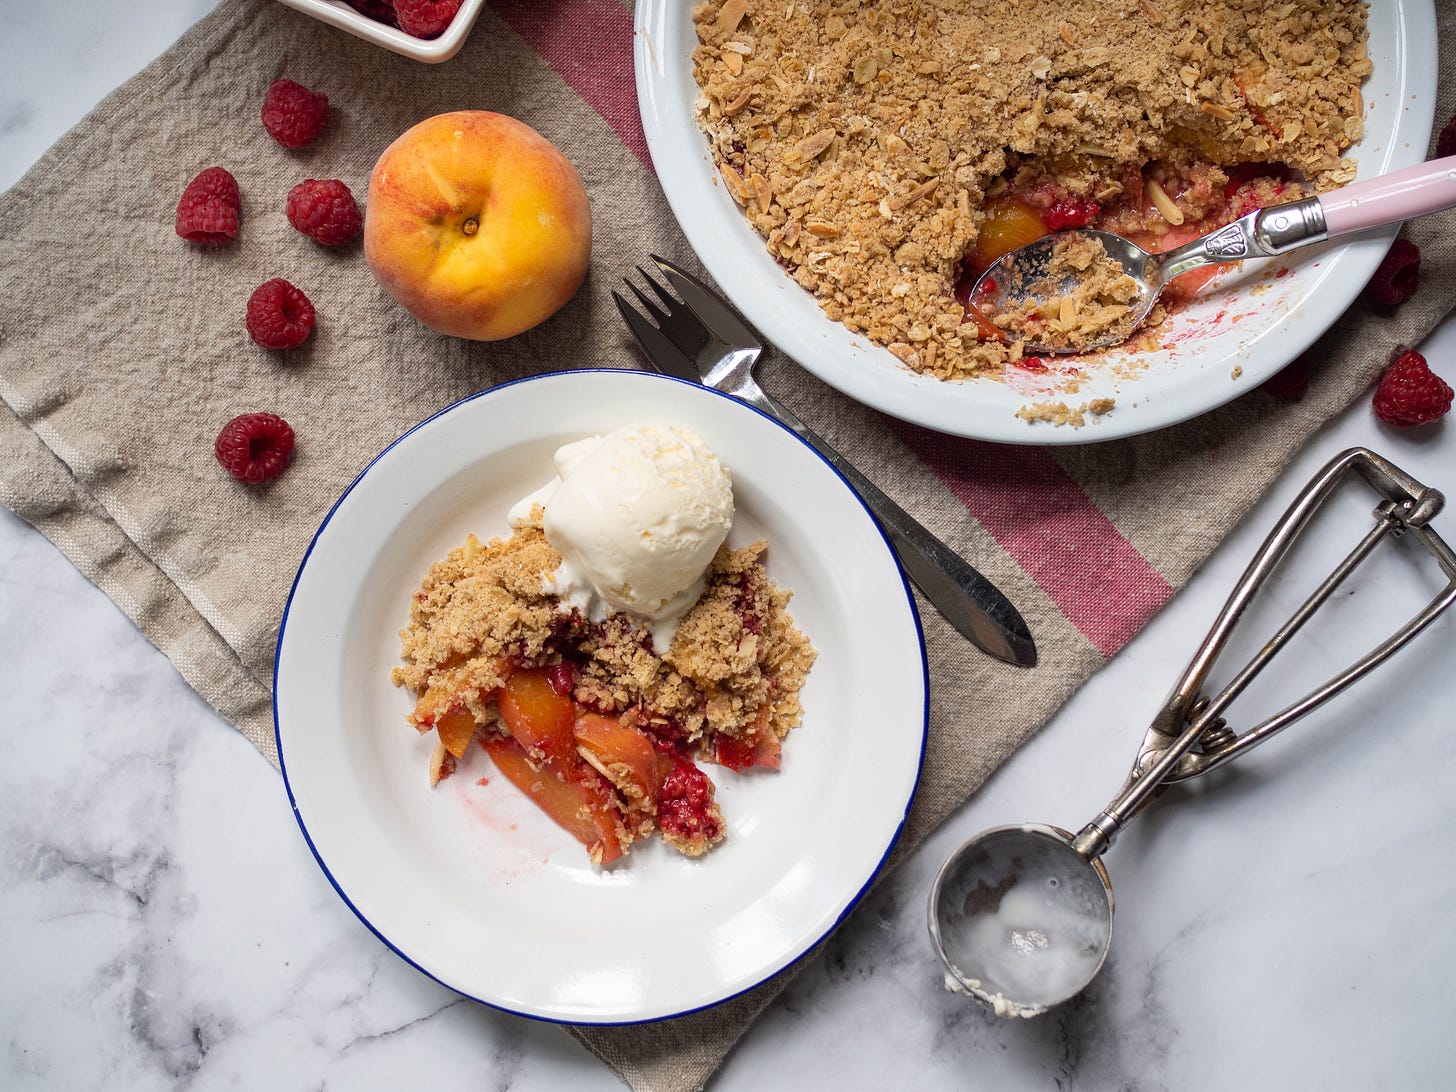 Peach and Raspberry Crumble for The Healthy Baker/Sunshine Sugar